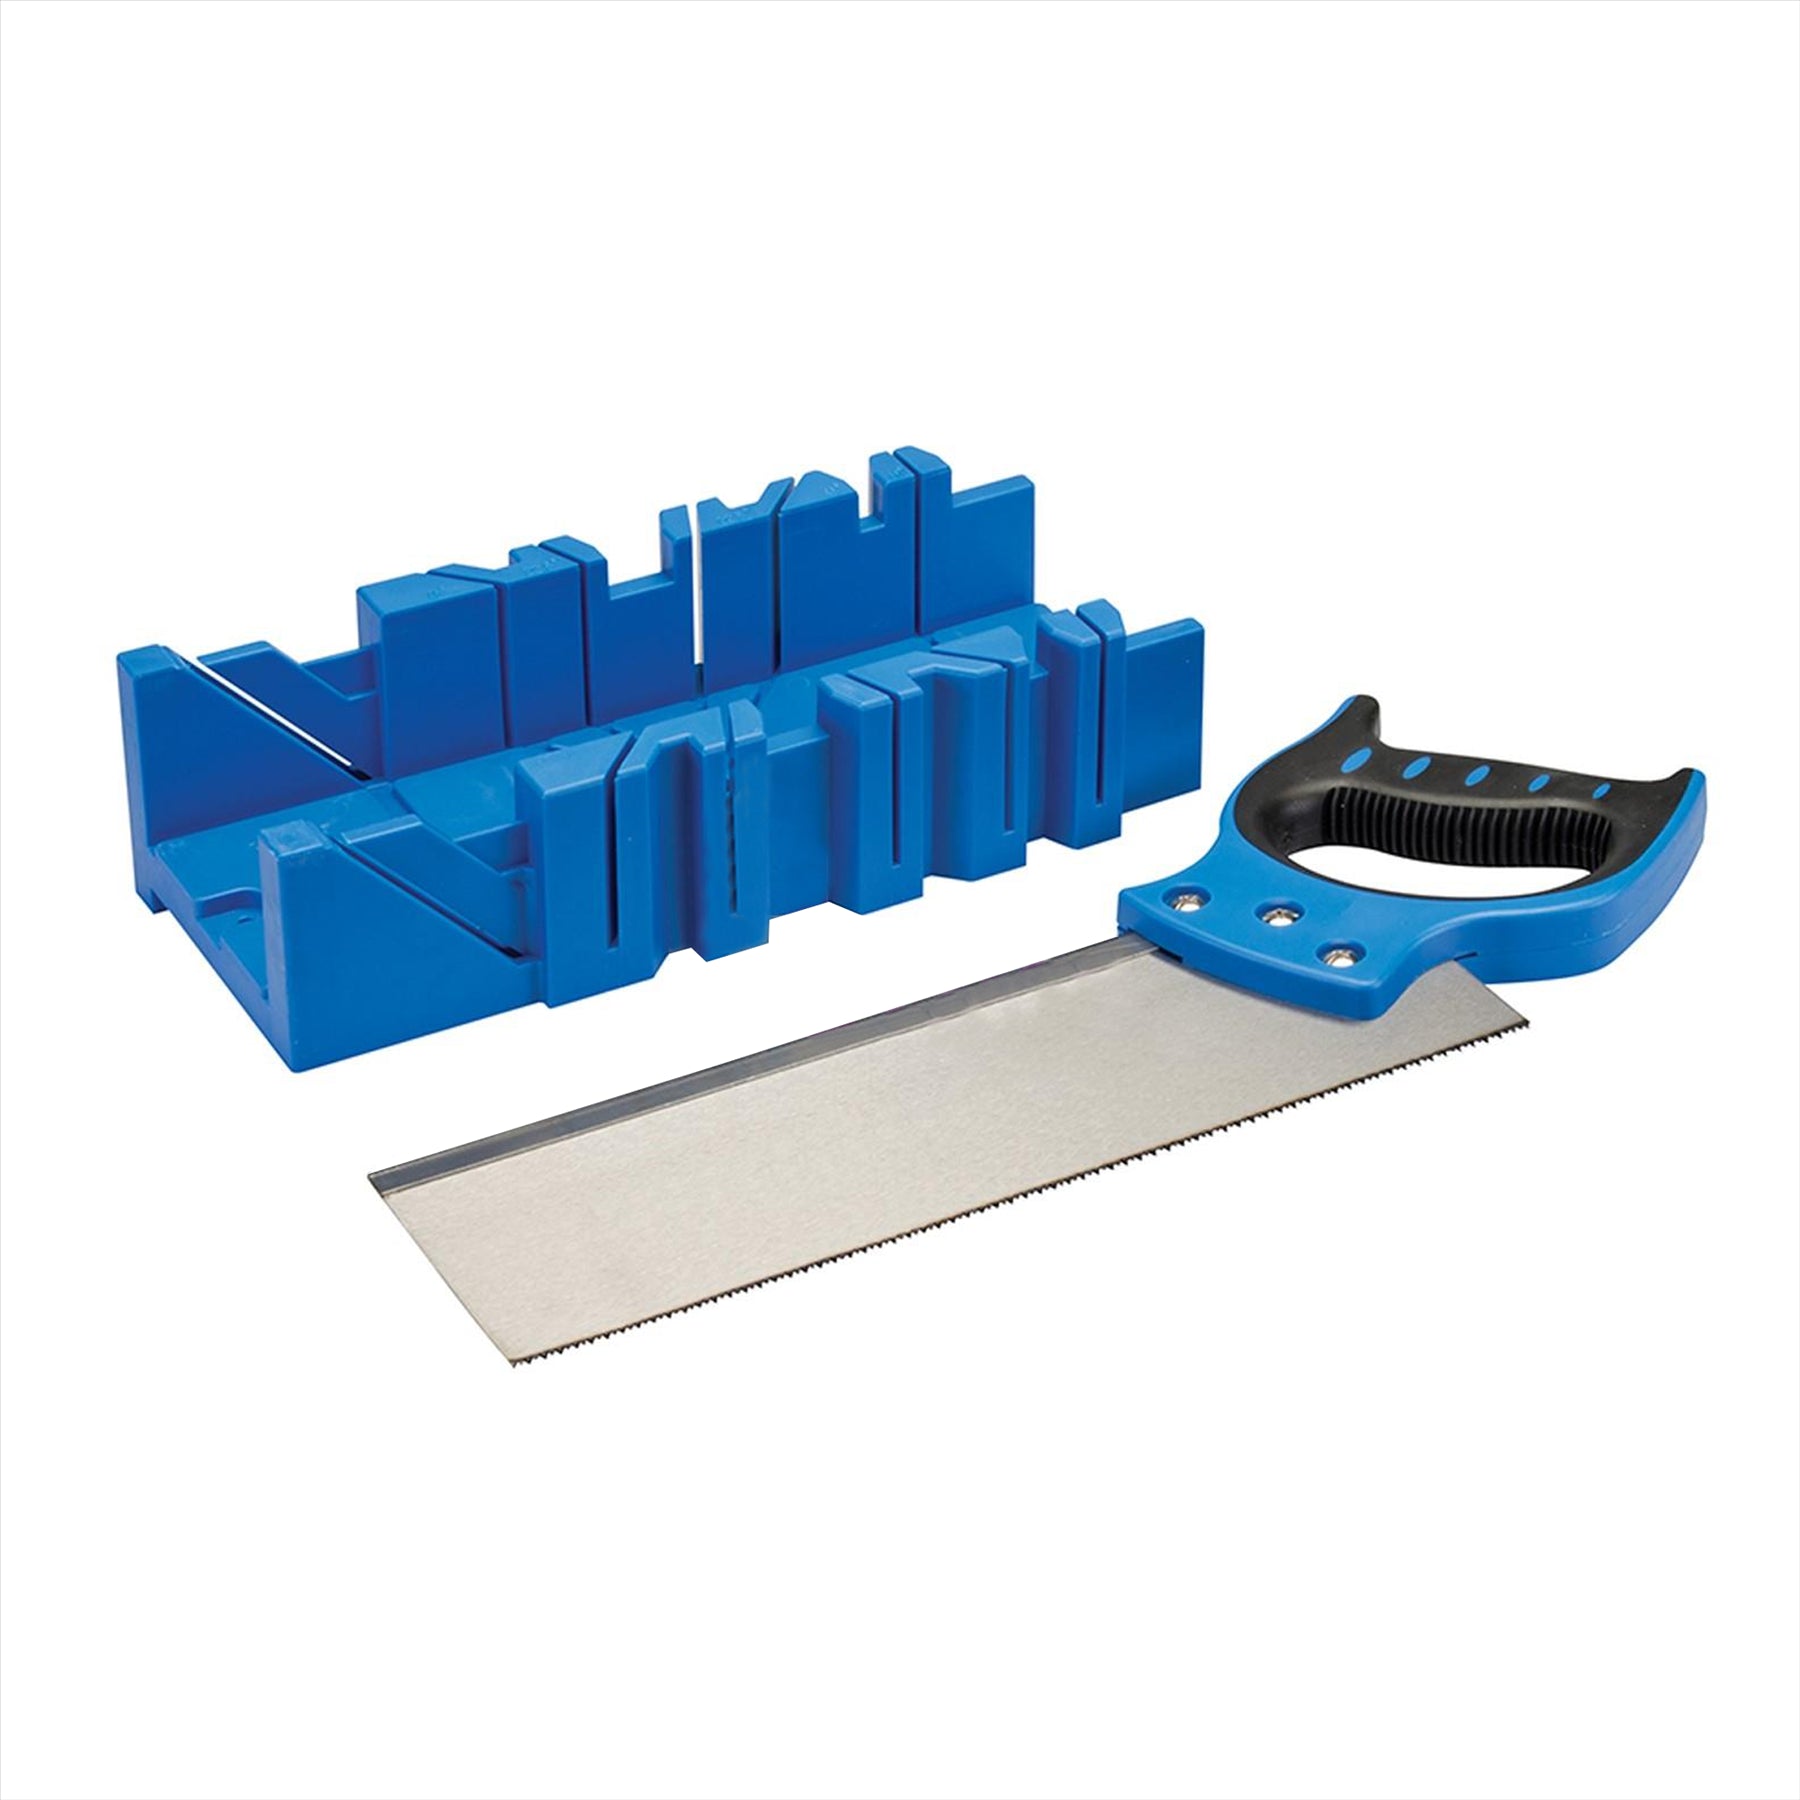 Expert Mitre Box & Saw 300 X 90mm With Maximum Capacity 90mm Wide X 50mm Deep